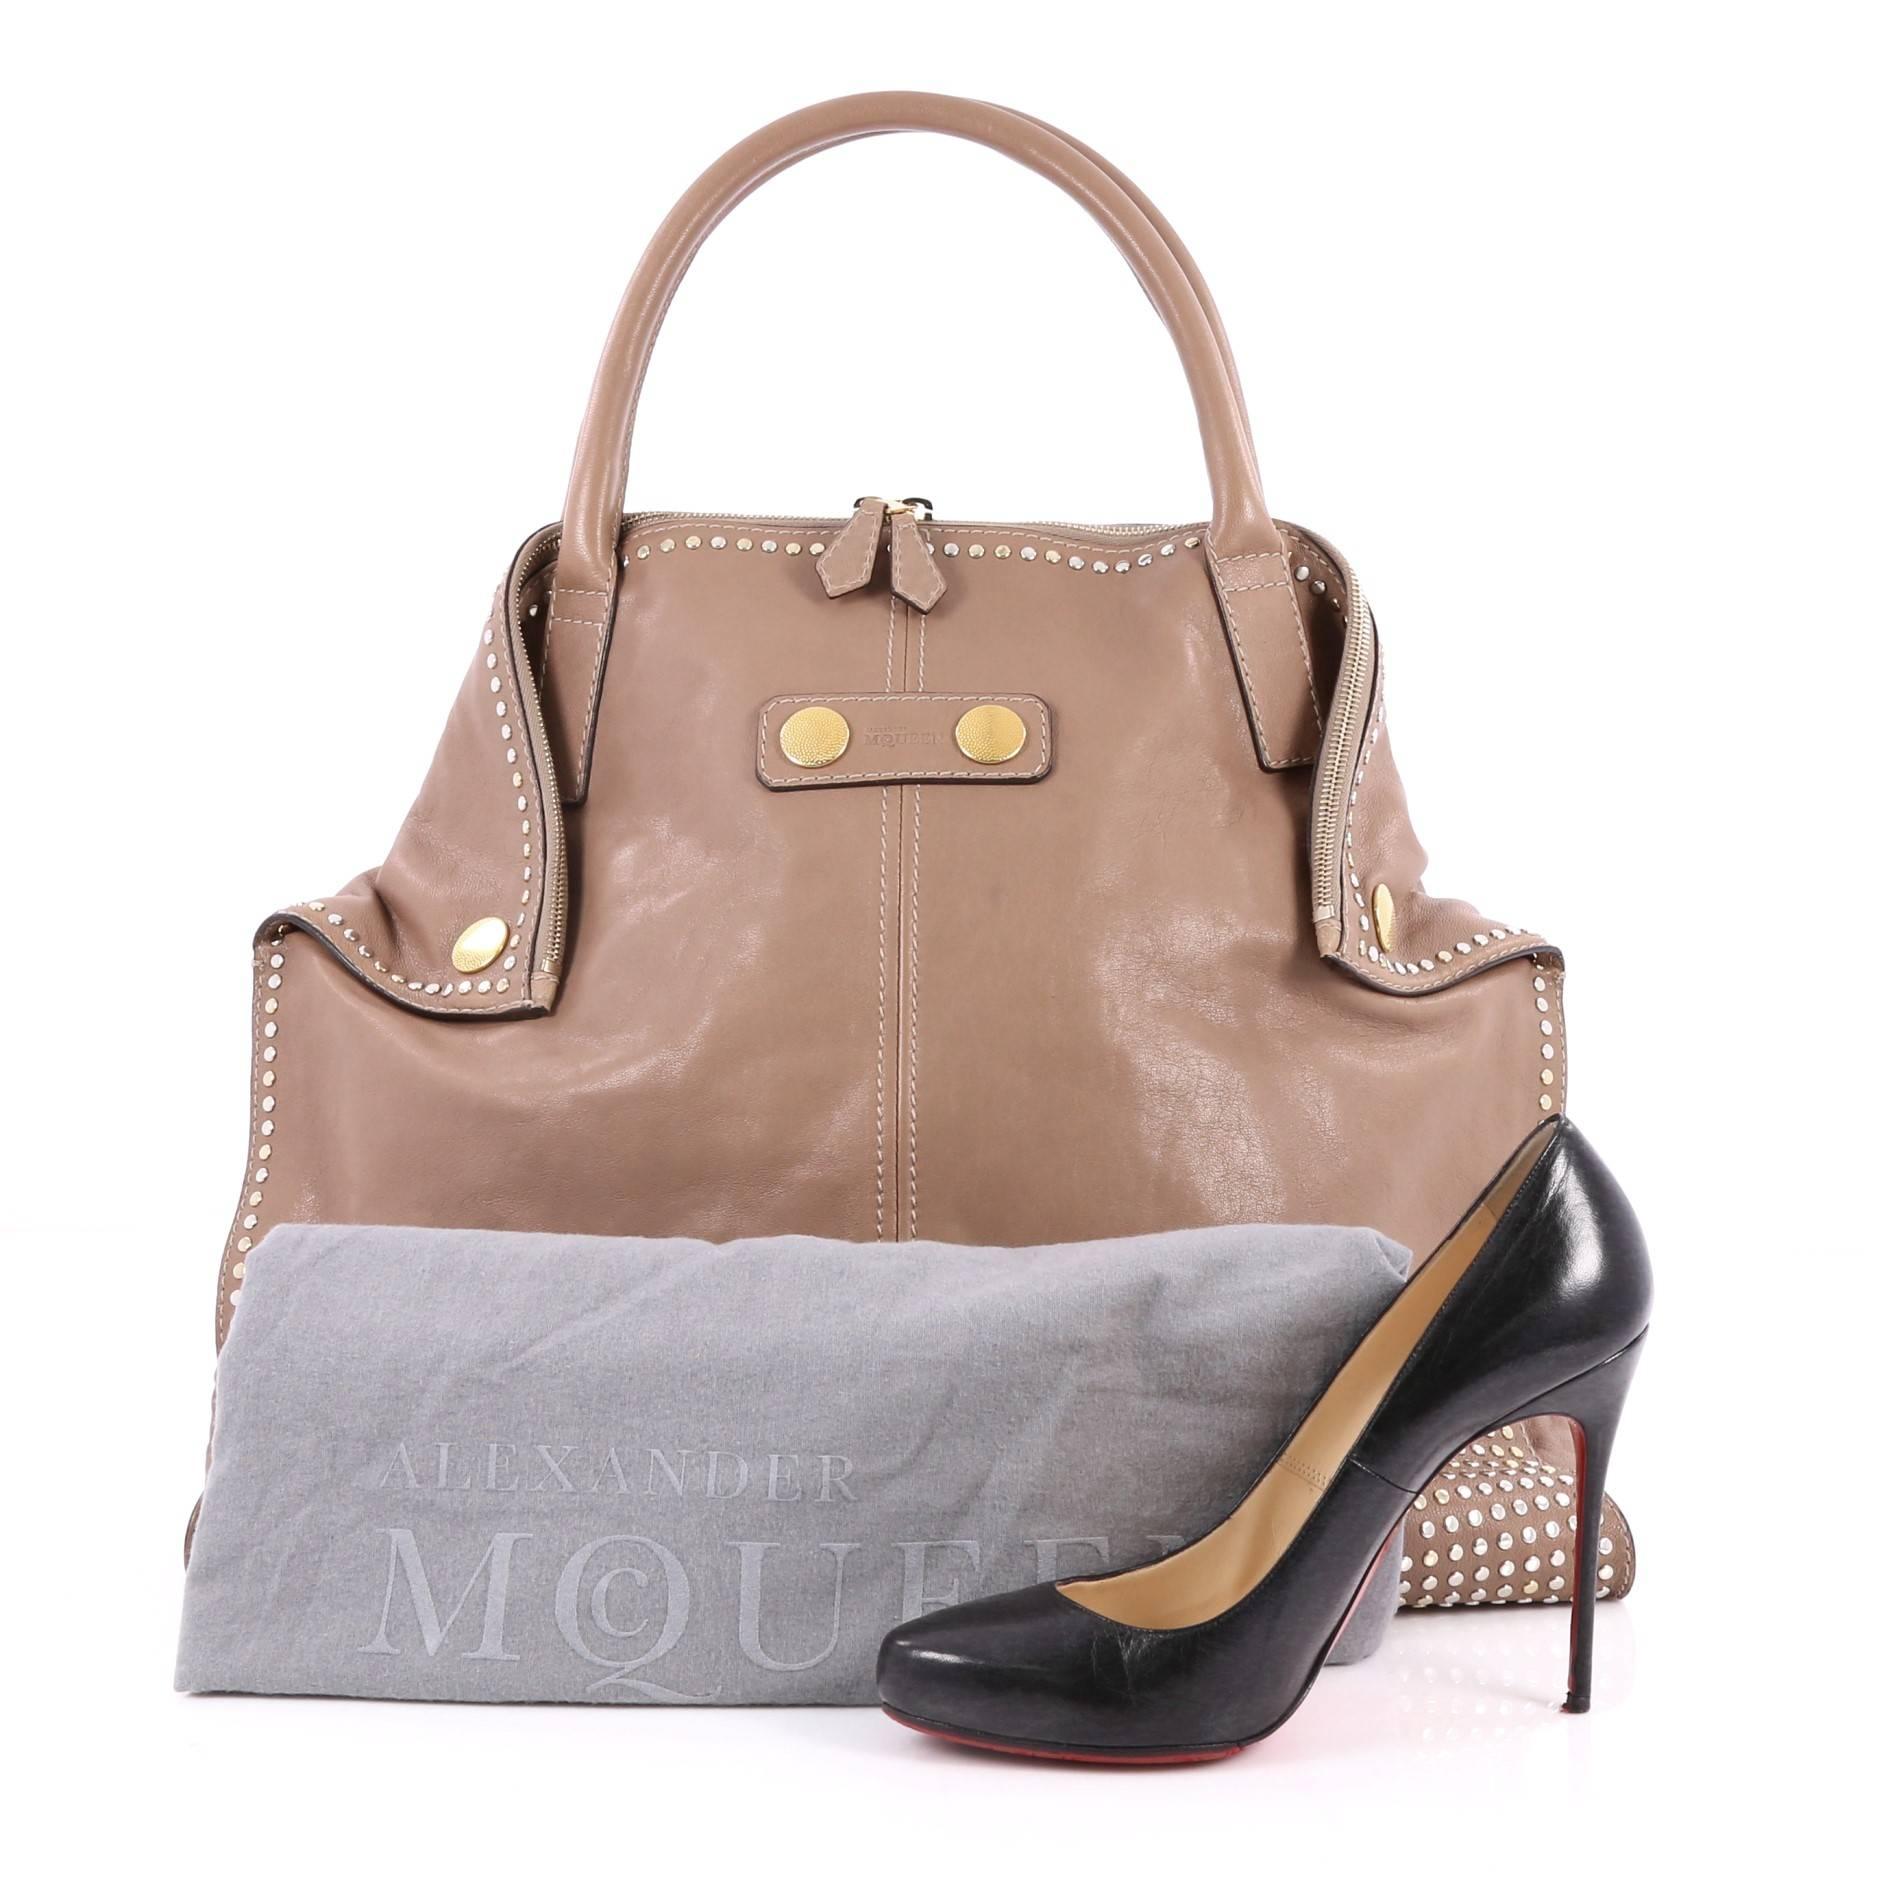 This authentic Alexander McQueen De Manta Tote Studded Leather Large is simple and minimalist in design ideal for work and everyday casual looks. Crafted in taupe leather, this elongated tote features dual-rolled handles, fold-down hidden magnet